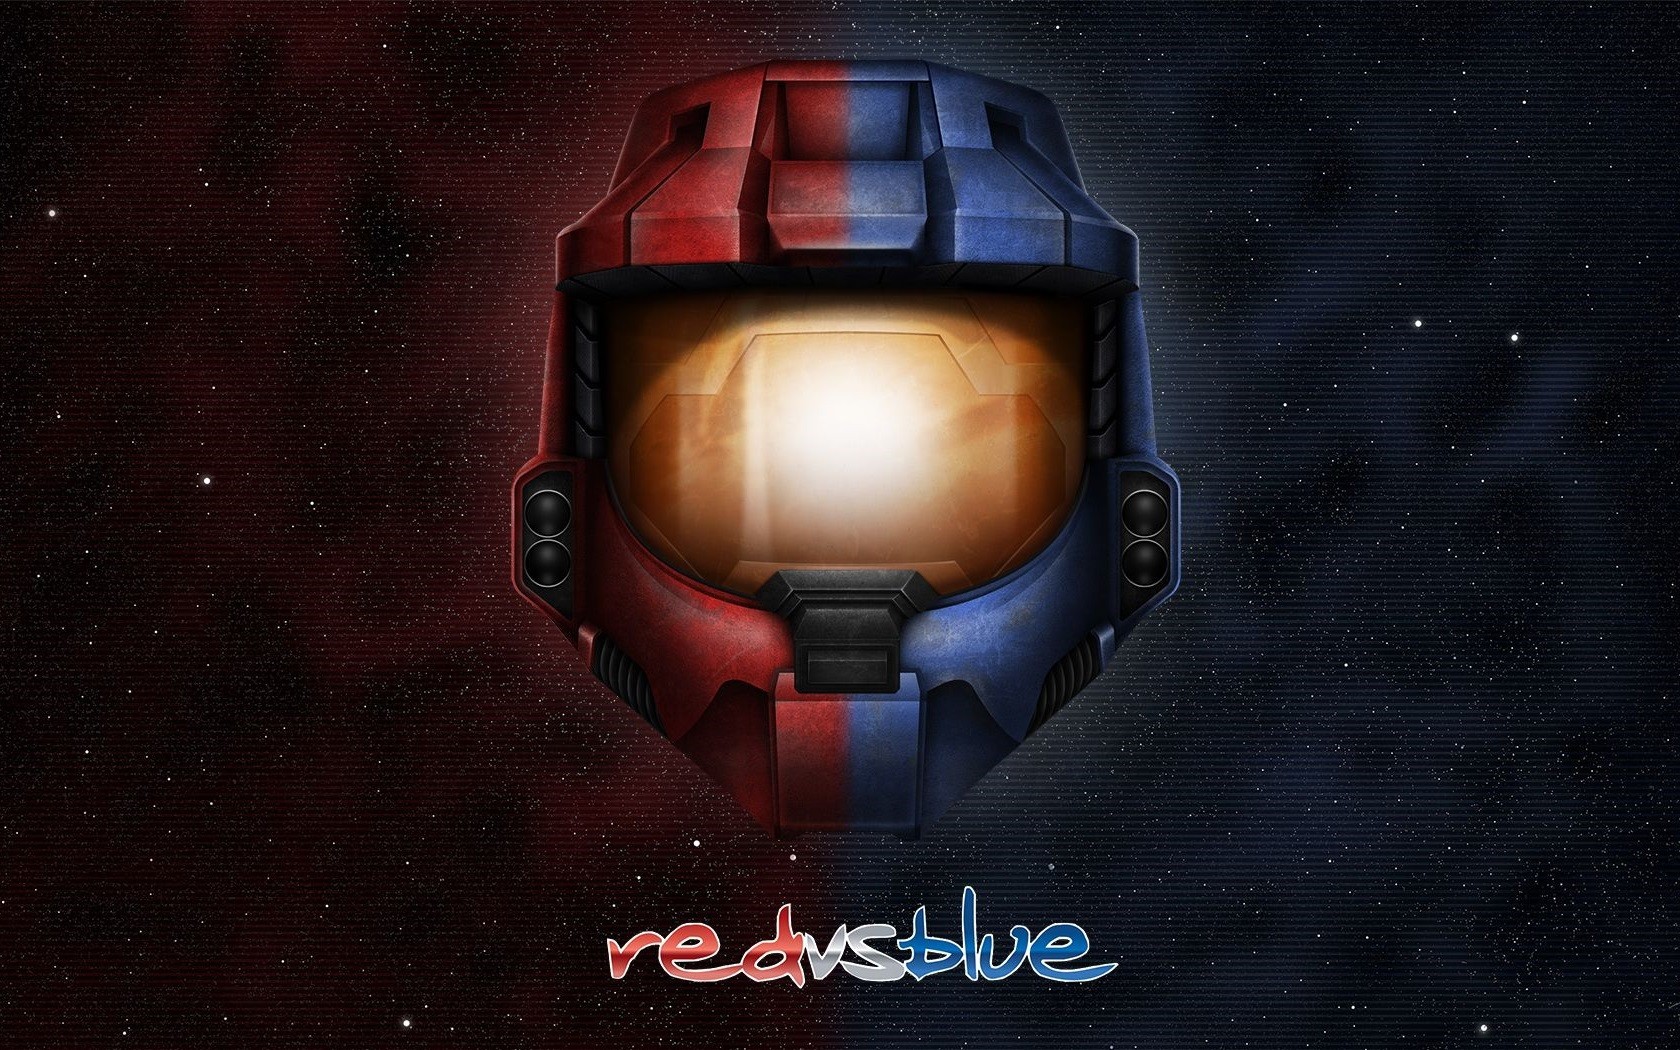 Cartoon Red vs. Blue wallpapers and images - wallpapers, pictures ...